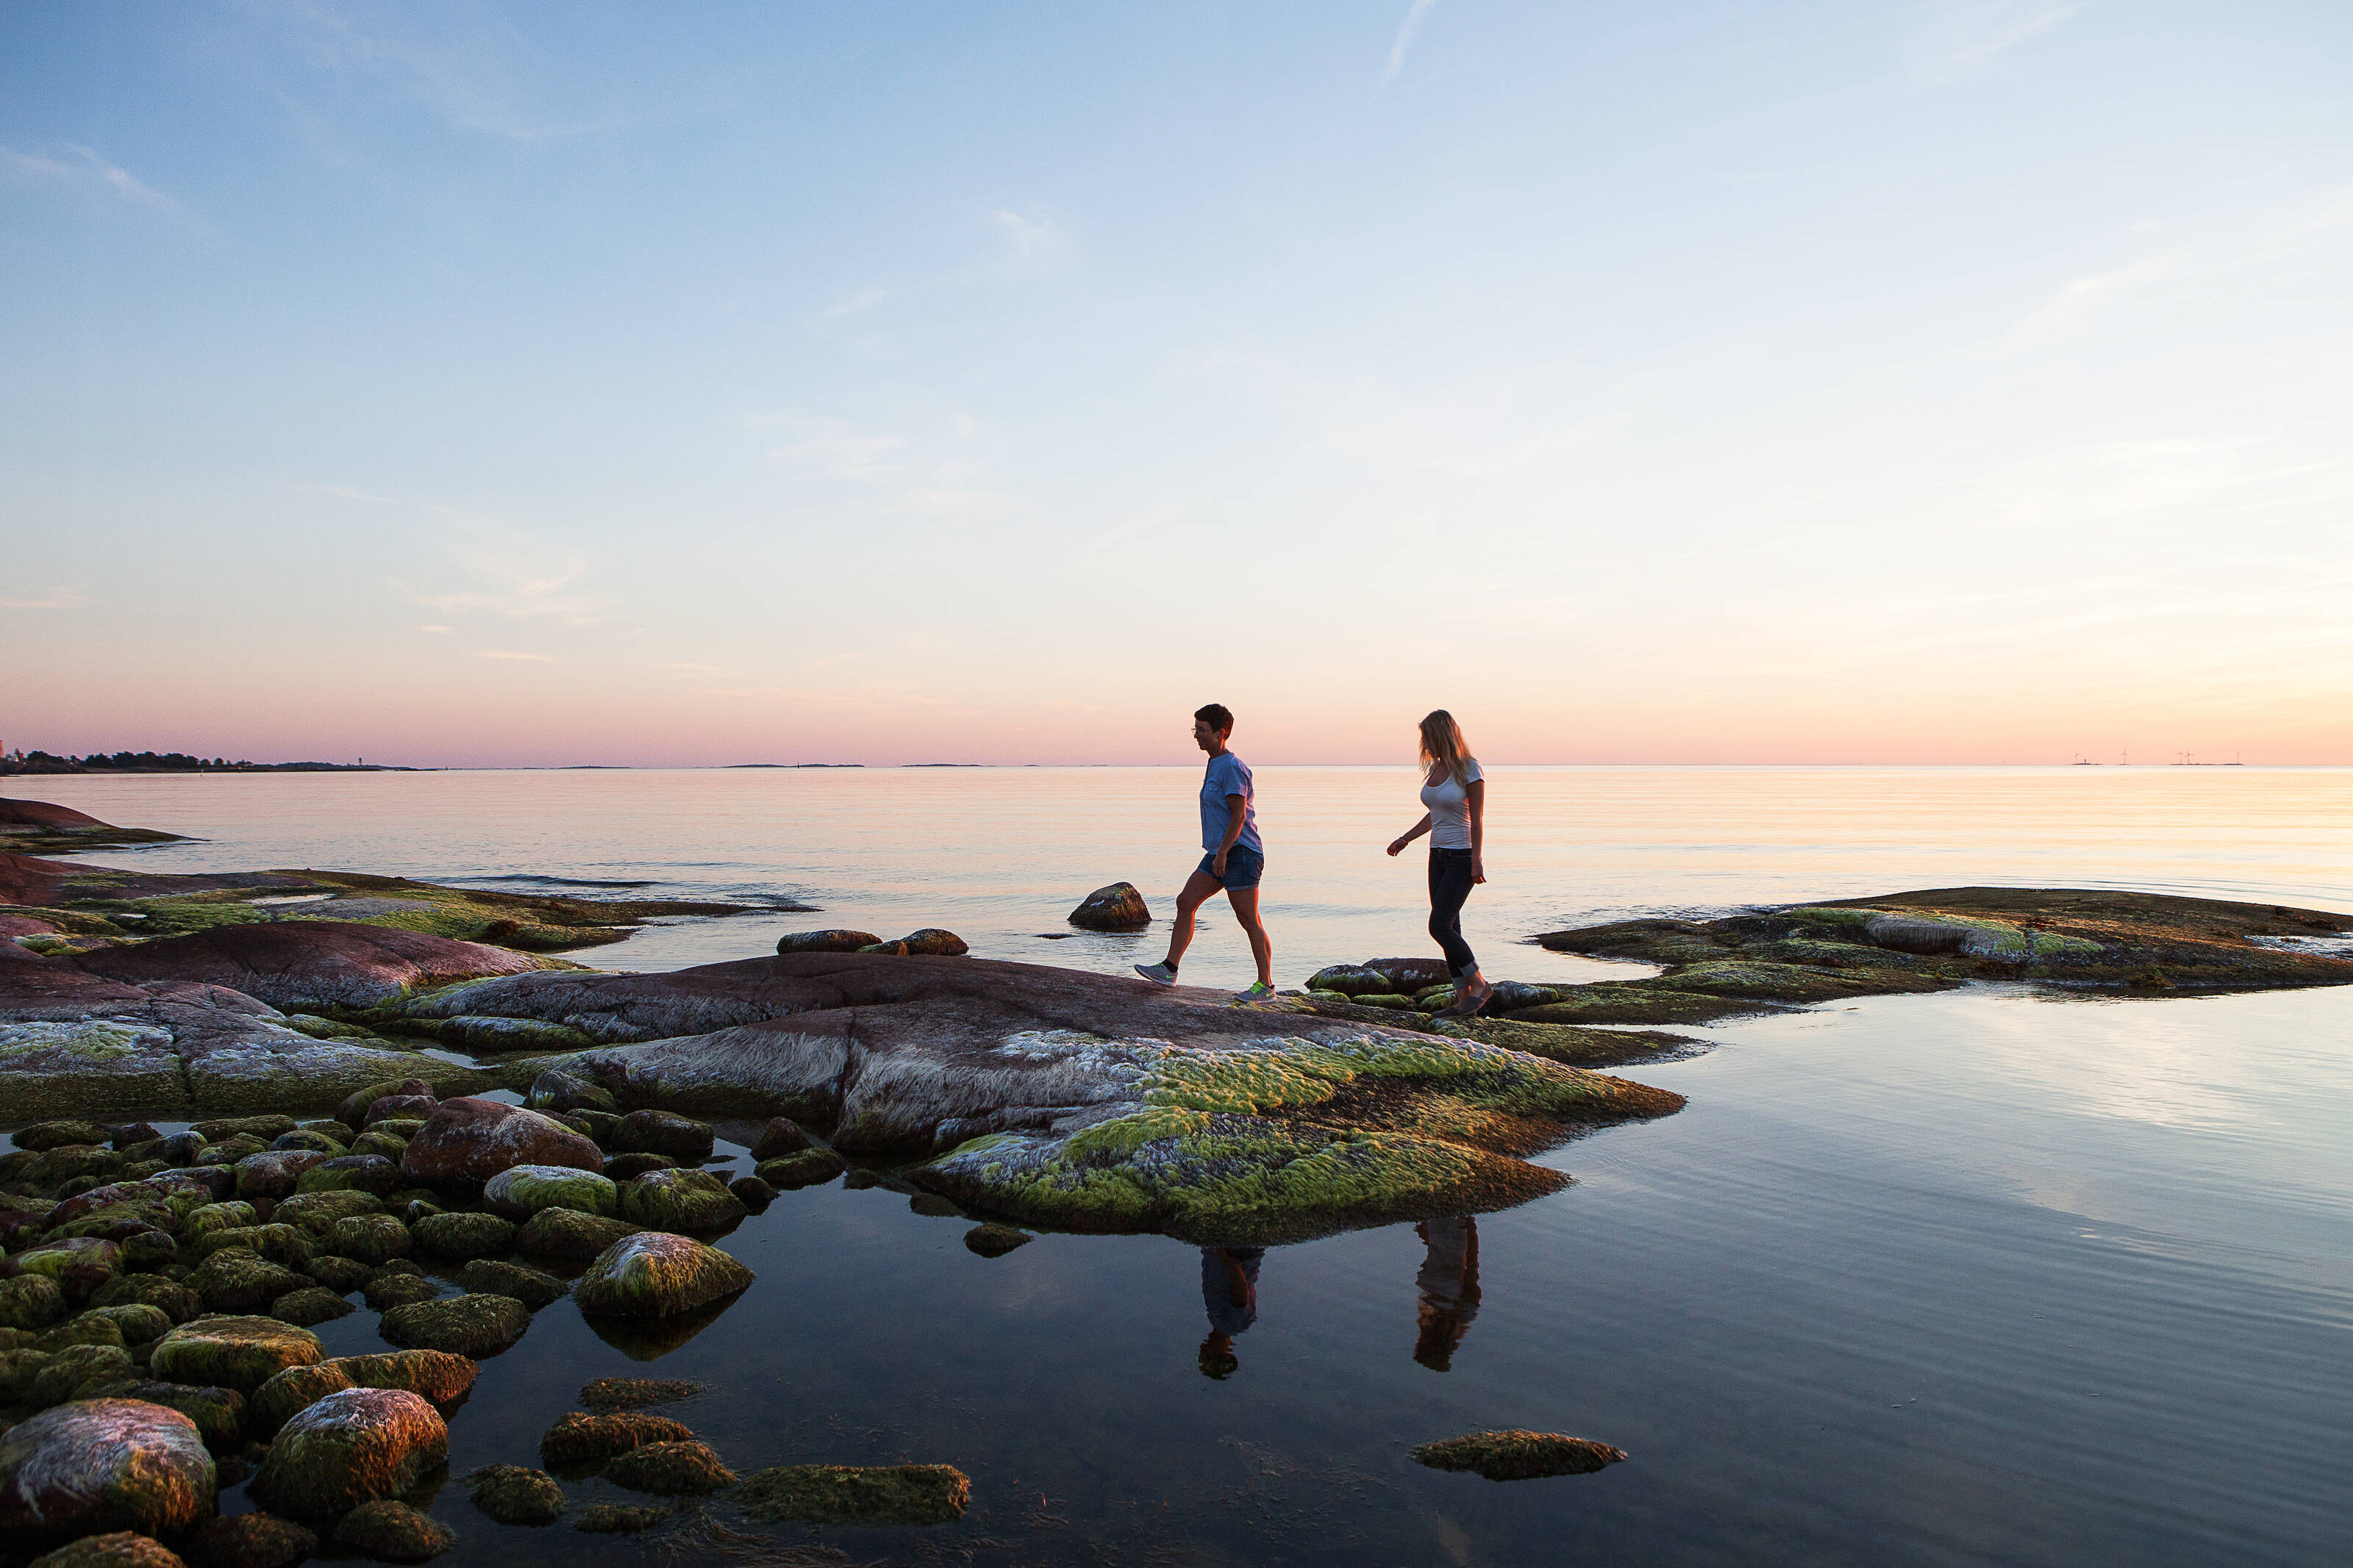 Two people walking on stones by the sea shore